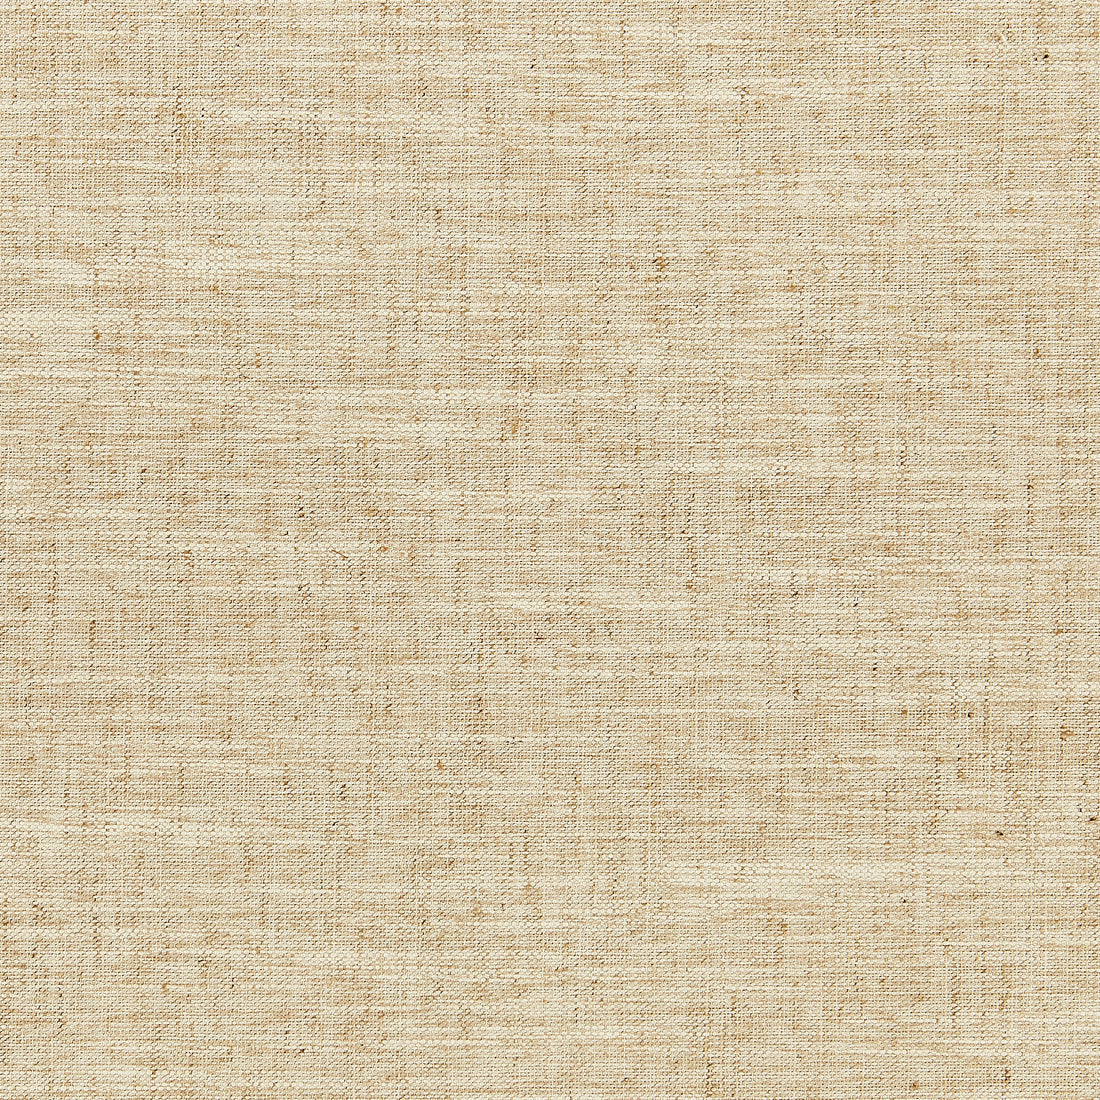 Amali fabric in oatmeal color - pattern number W80253 - by Thibaut in the Kaleidoscope Fabrics collection